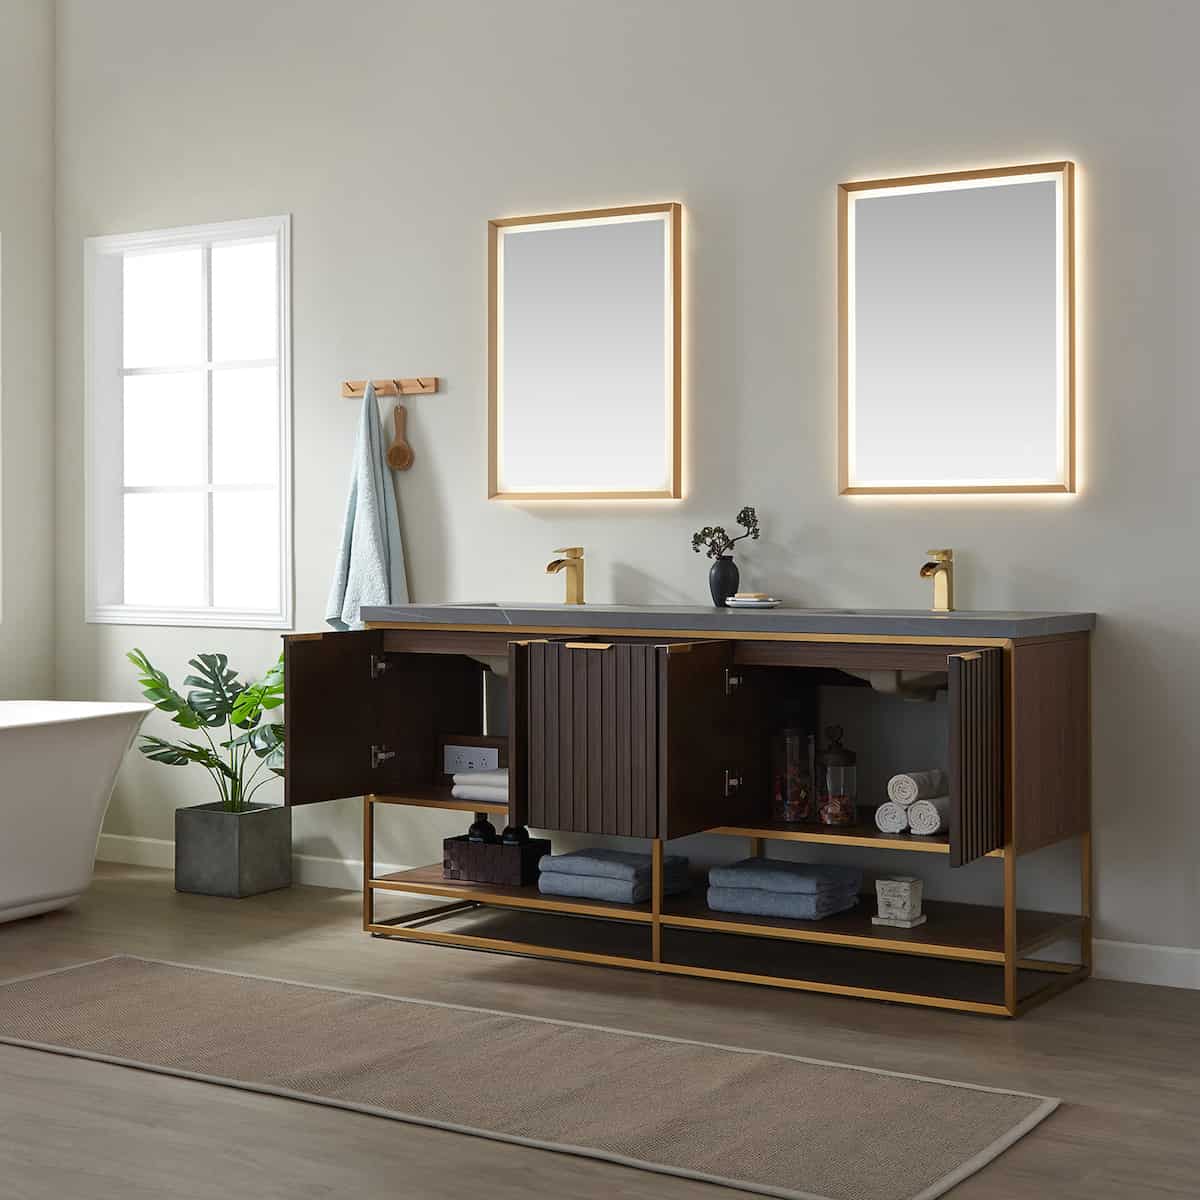 Vinnova Donostia 72 Inch Freestanding Double Vanity in Walnut with Grey Composite Armani Limestone Board Stone Countertop With Mirrors Inside 737072-NLW-ALB